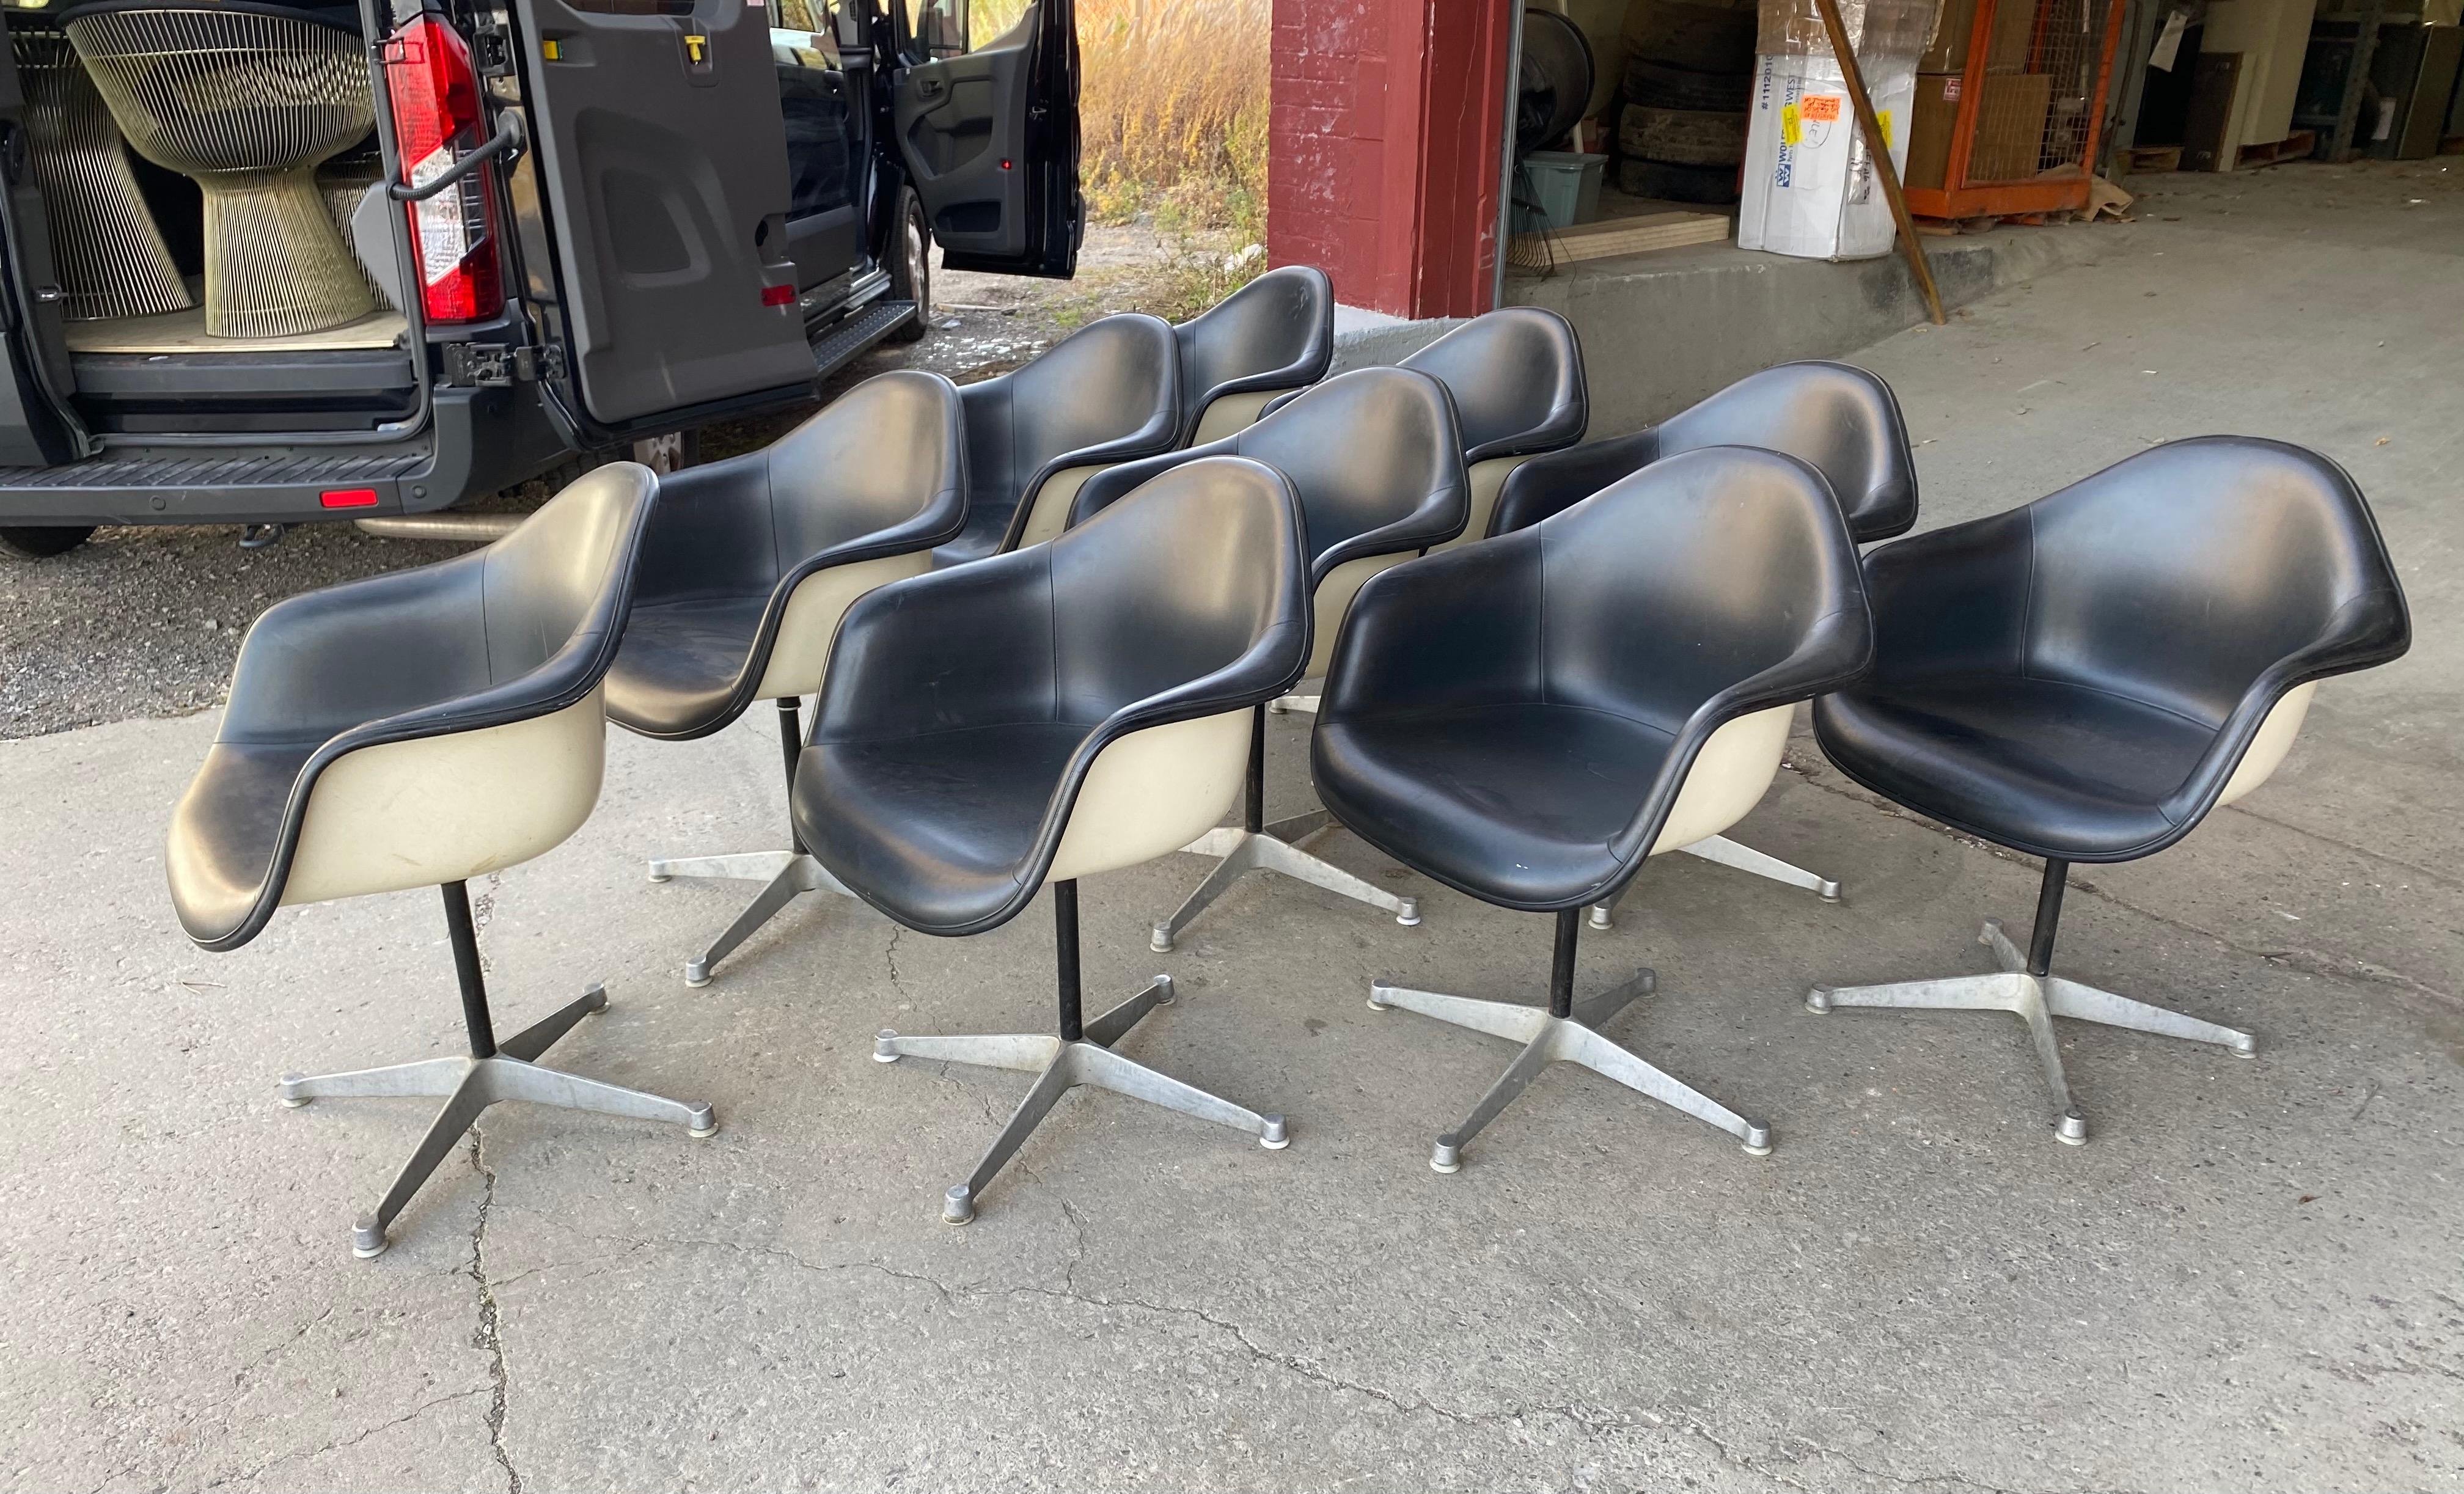 Set of 10 Charles and Ray Eames padded arm shell swivel chairs, Herman Miller/ alum star base, featuring white fiberglass shells, black padded upholstery, aluminum 4-star bases, nice original condition, minor blemishes to black Naugahyde, Classic